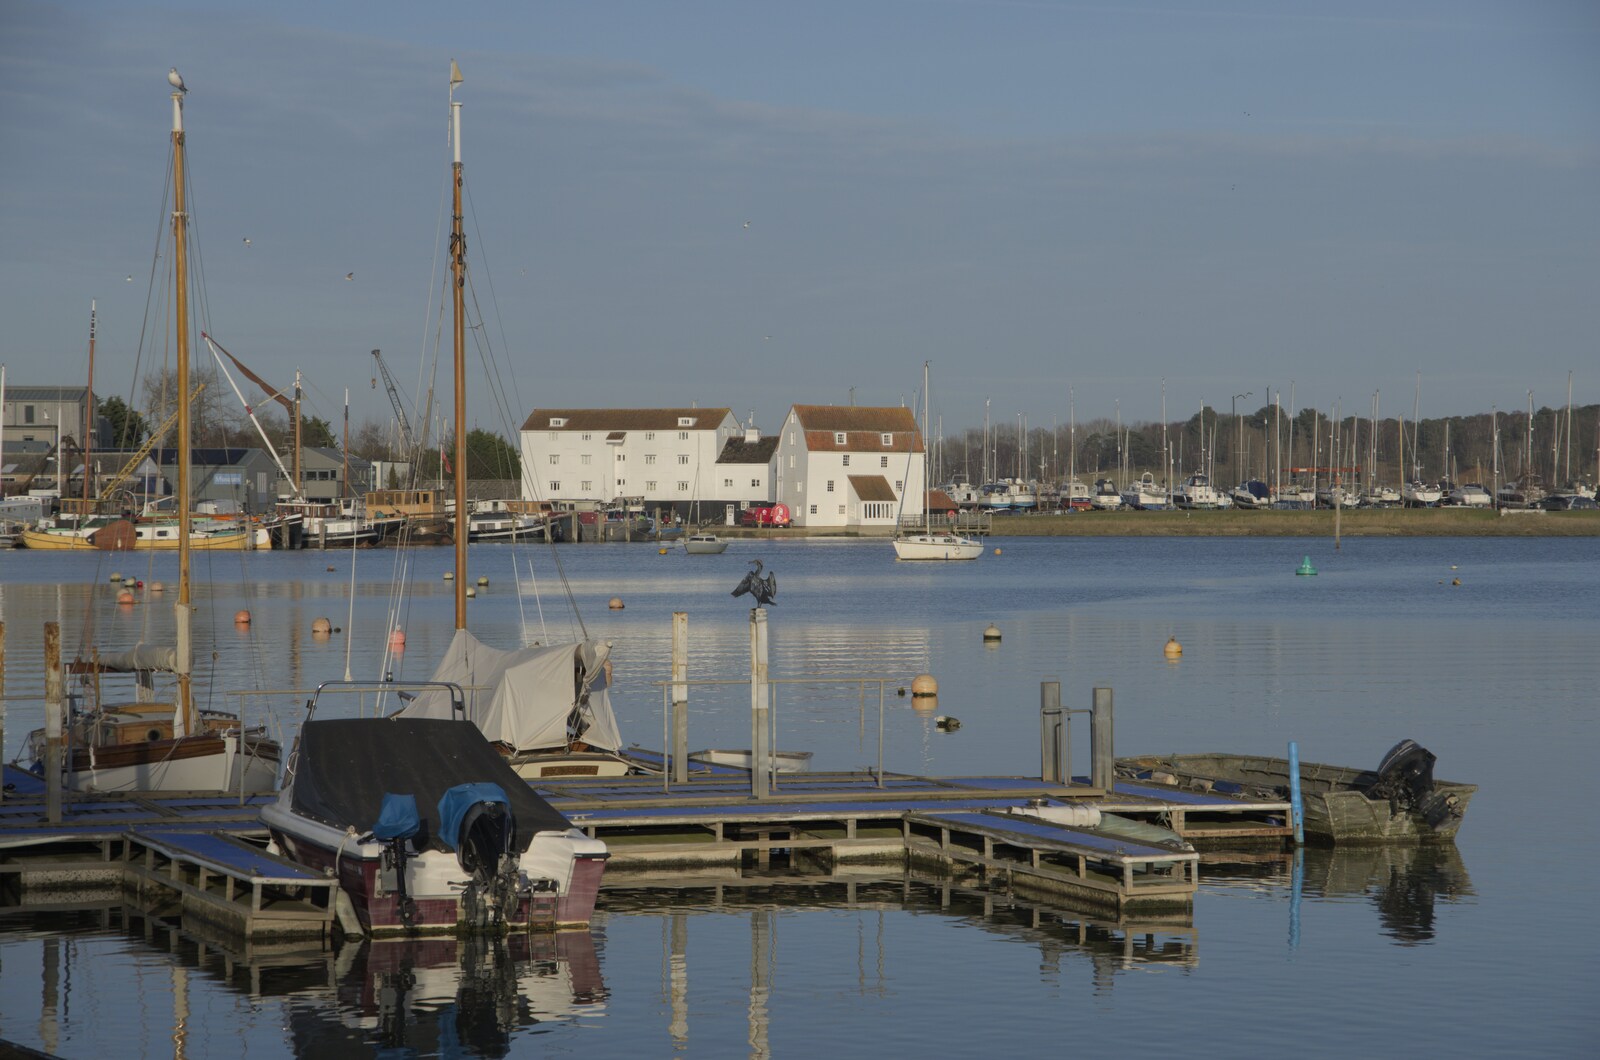 The Tide Mill from across the marina from A February Miscellany, Diss and Woodbridge, Suffolk - 3rd February 2024